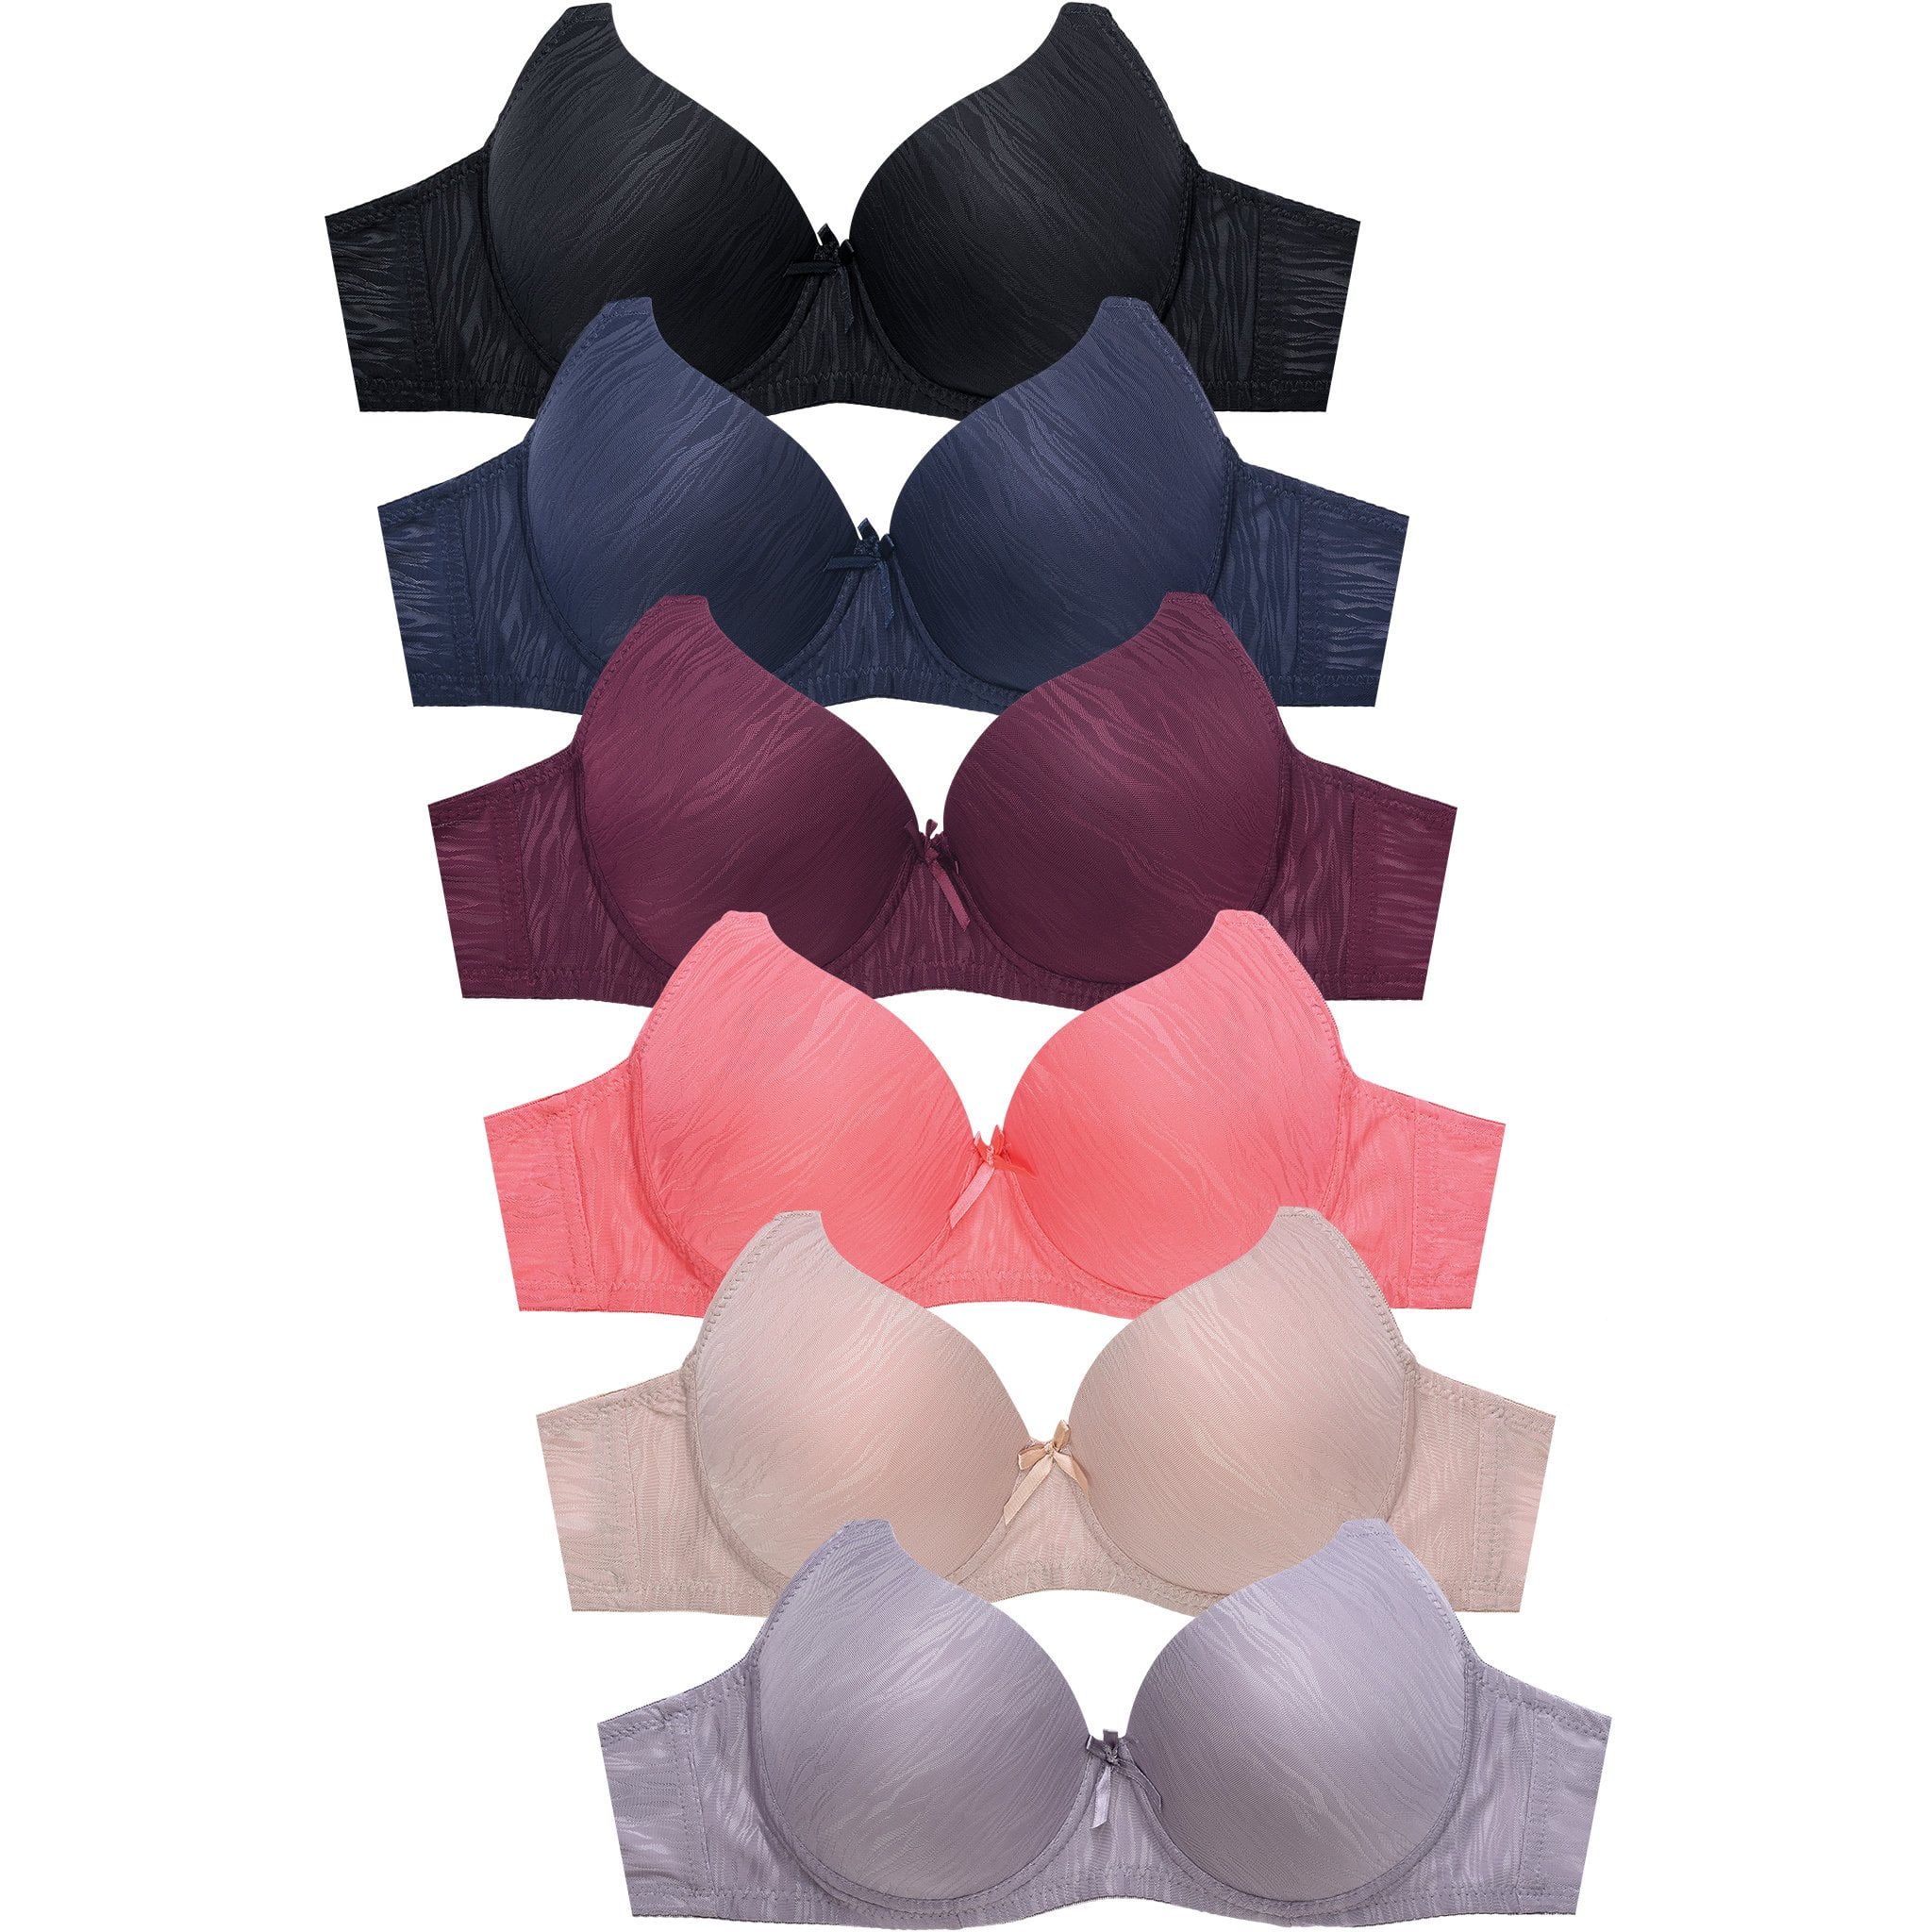 Womens 6 Pack of Everyday Plain, Lace, Wireless Bra (4207P5, 30A